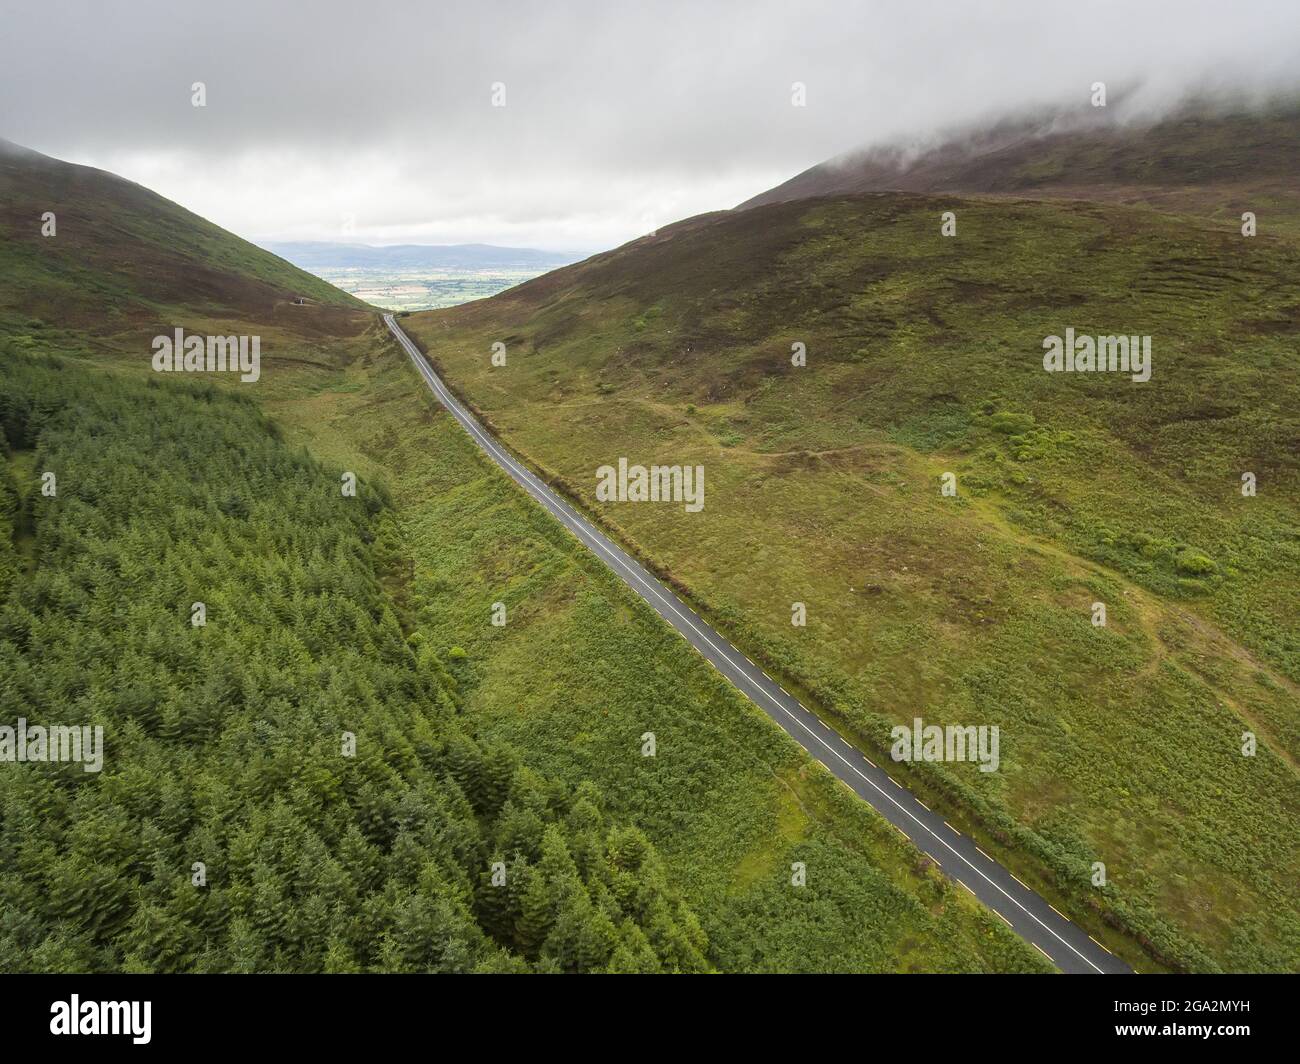 Aerial View of the scenic drive along the road known as The Vee with its forested green mountains; County Waterford, Ireland Stock Photo